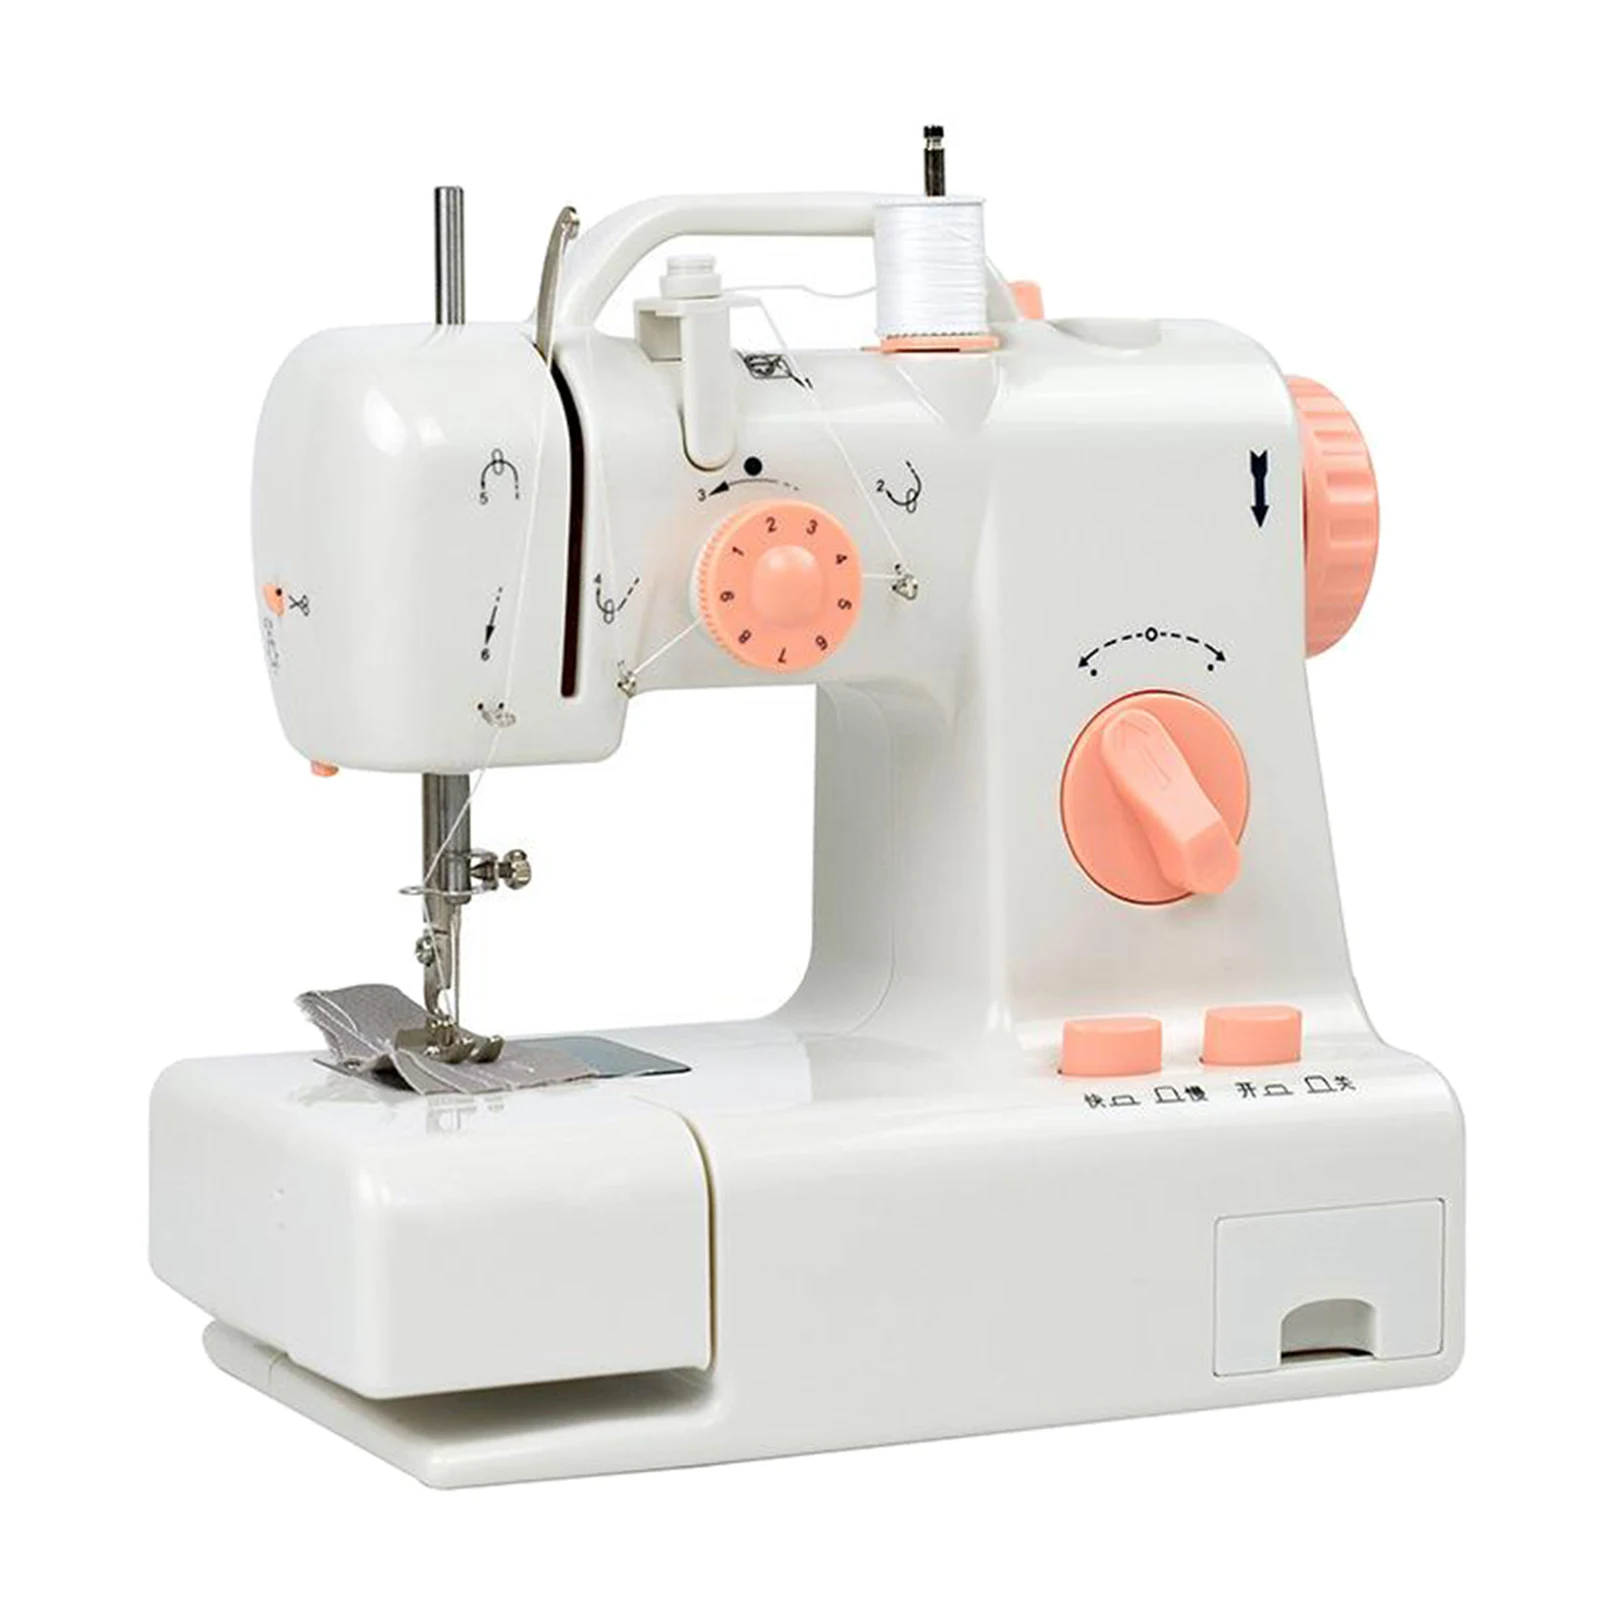 Mini Electric Sewing Machine Double Speed Adjustment With Light Household Portable Needlework Handheld Sewing Machine